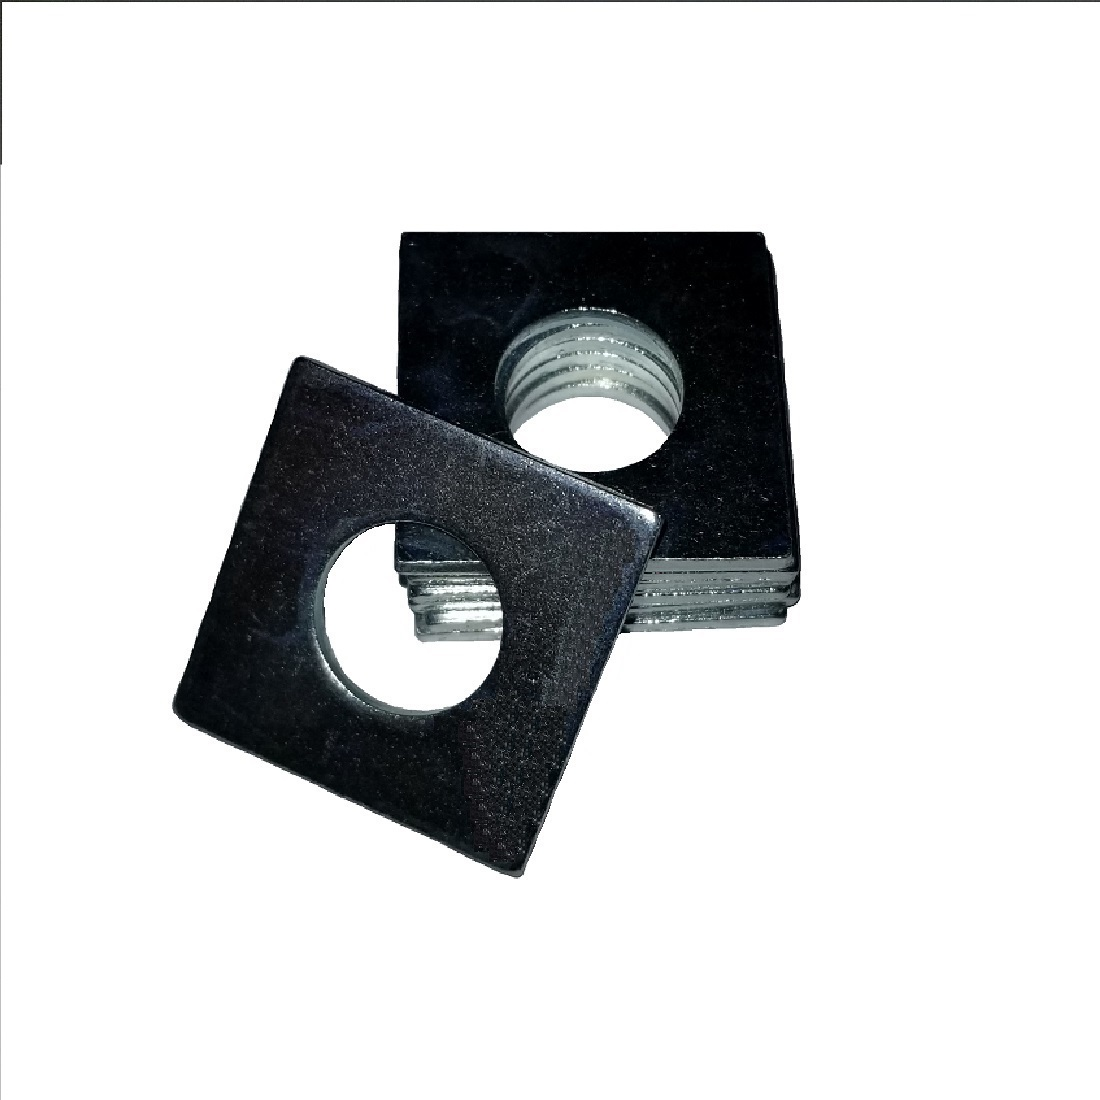 Square OD Washer - 0.500 ID, 2.000 OD, 0.187 Thick, Low Carbon Steel - Soft